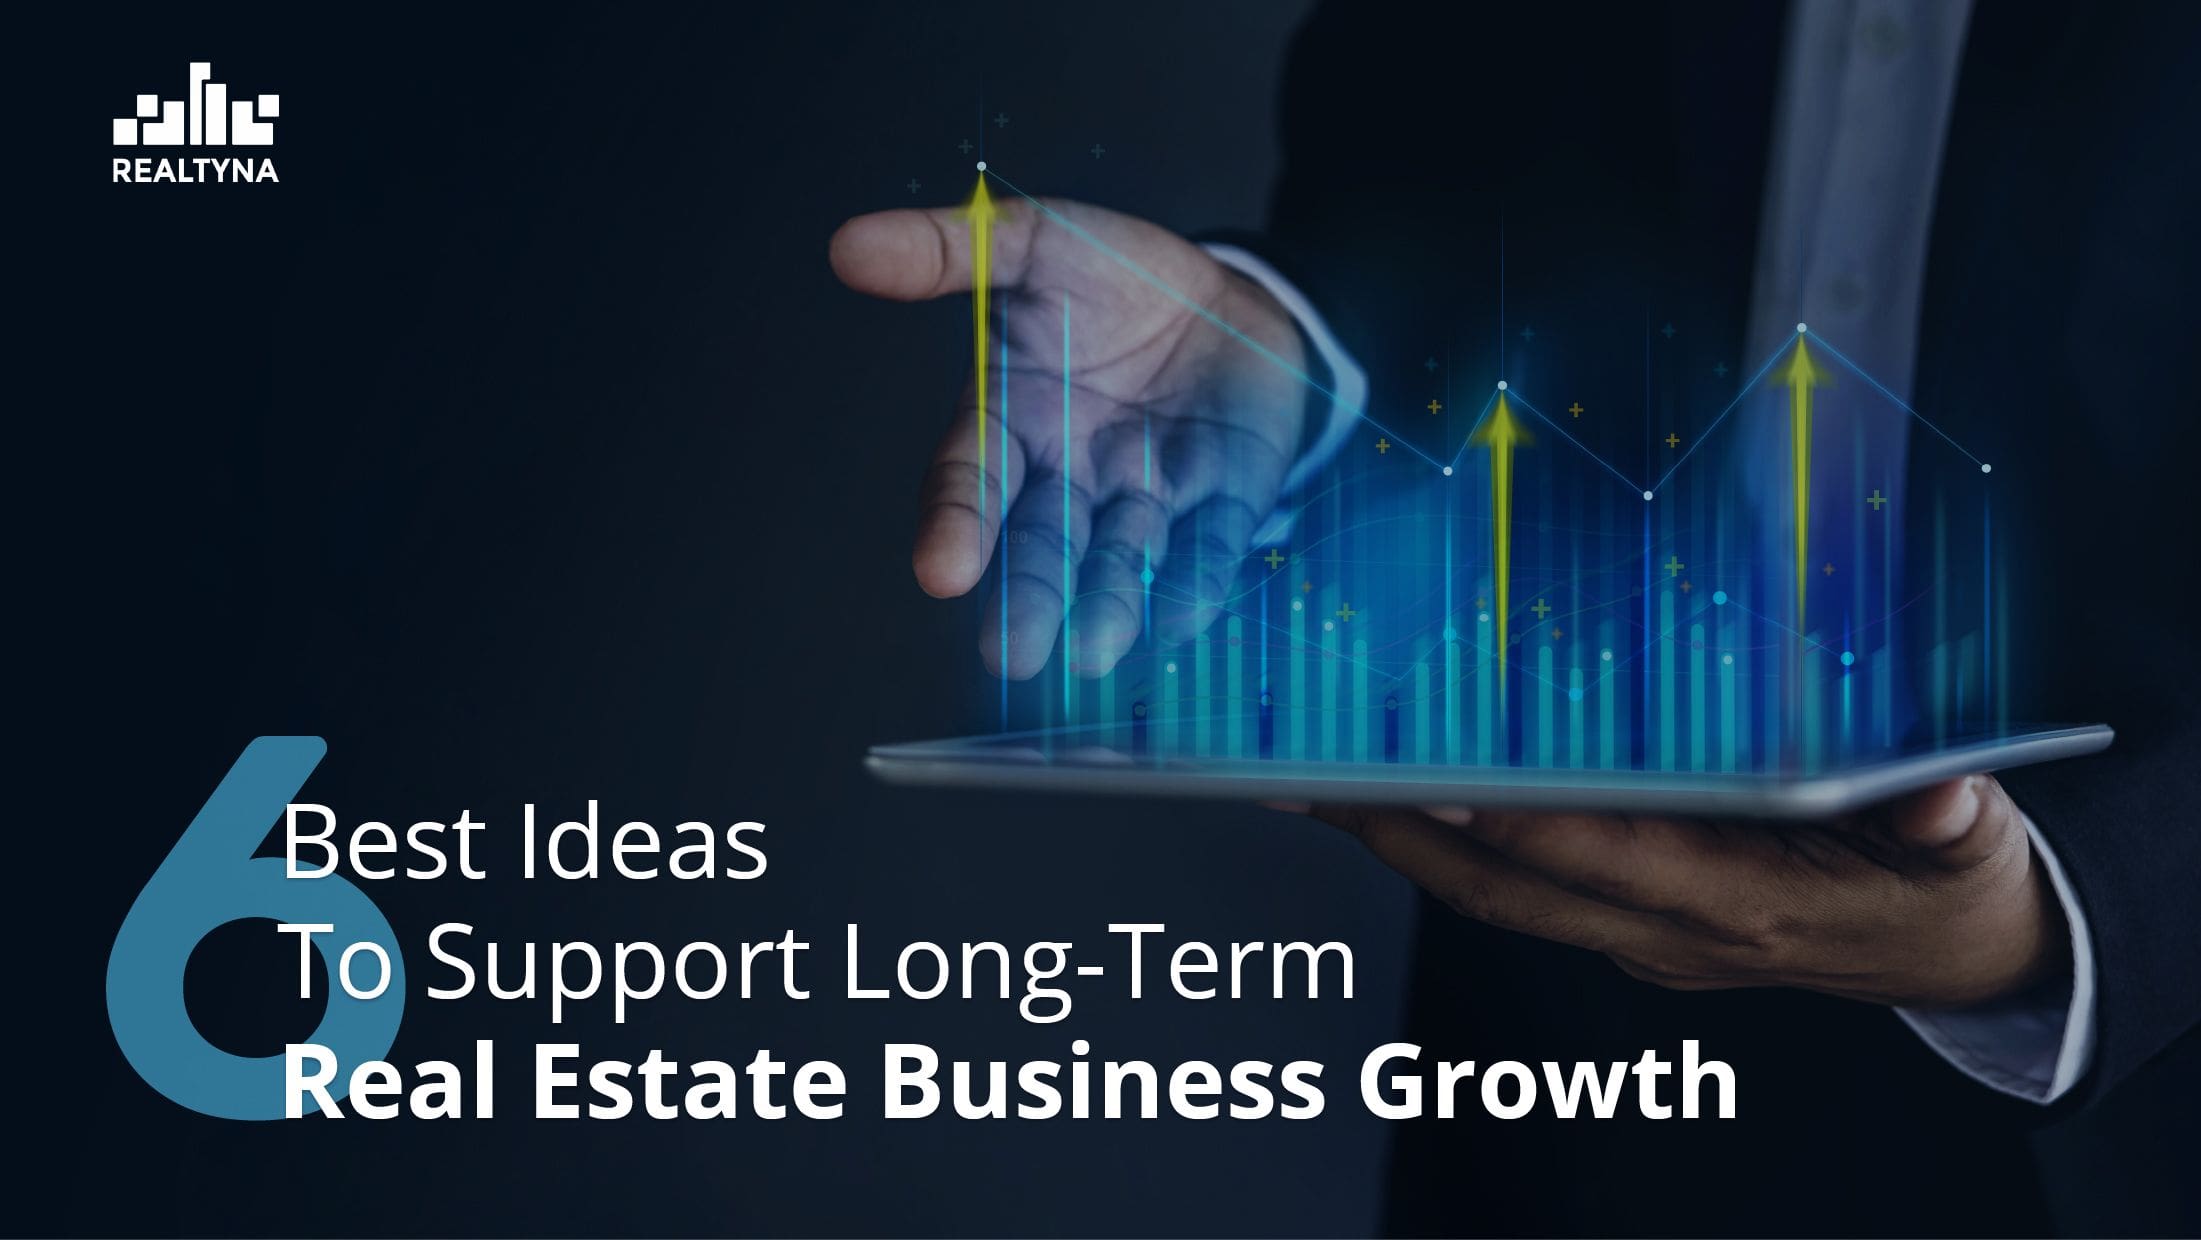 Real Estate Business Growth